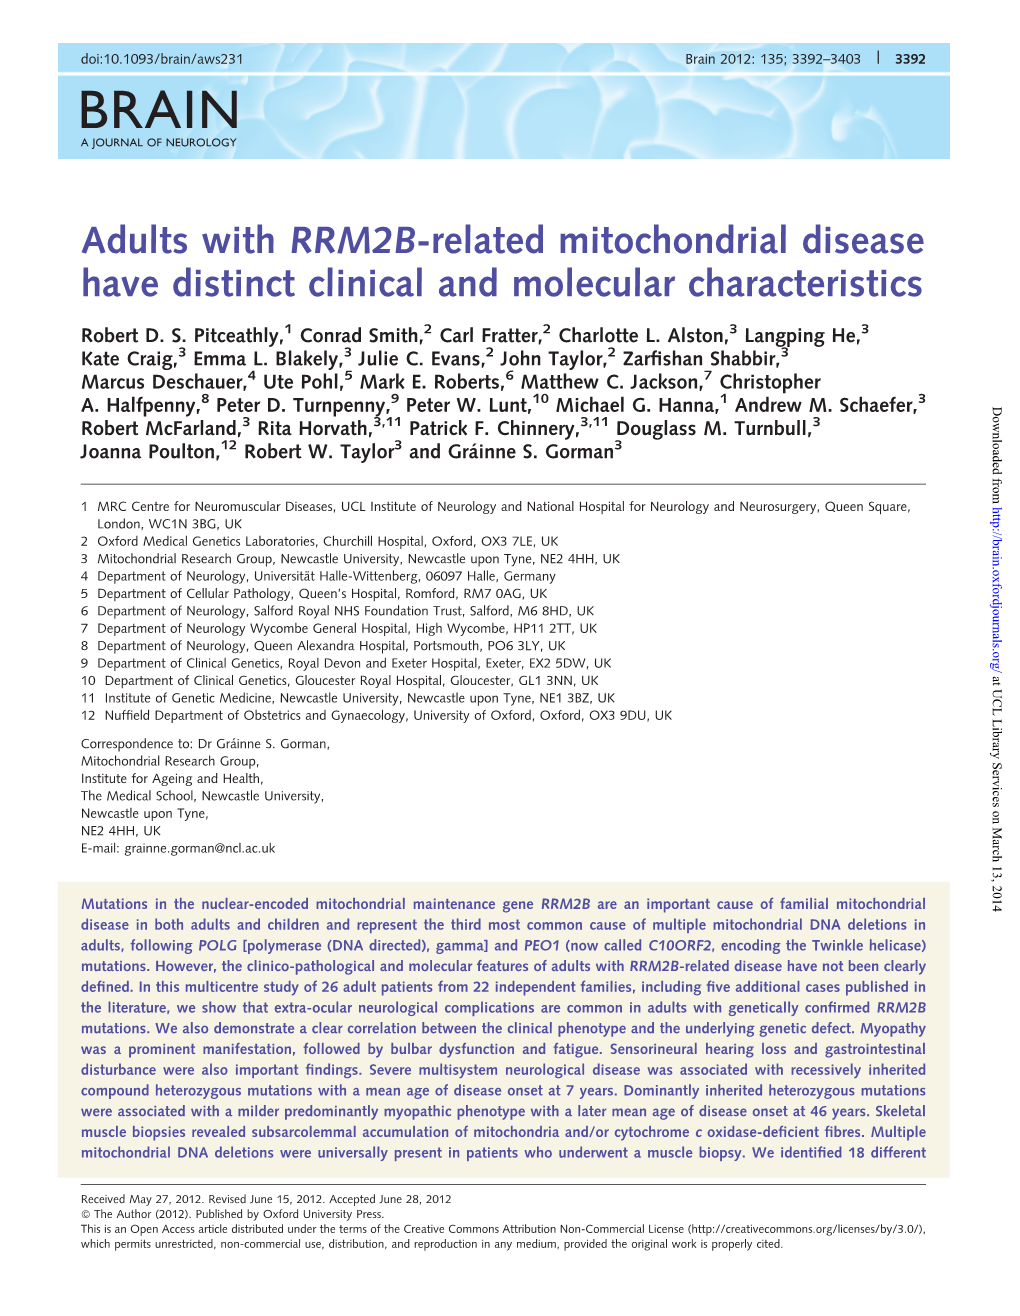 Adults with RRM2B-Related Mitochondrial Disease Have Distinct Clinical and Molecular Characteristics